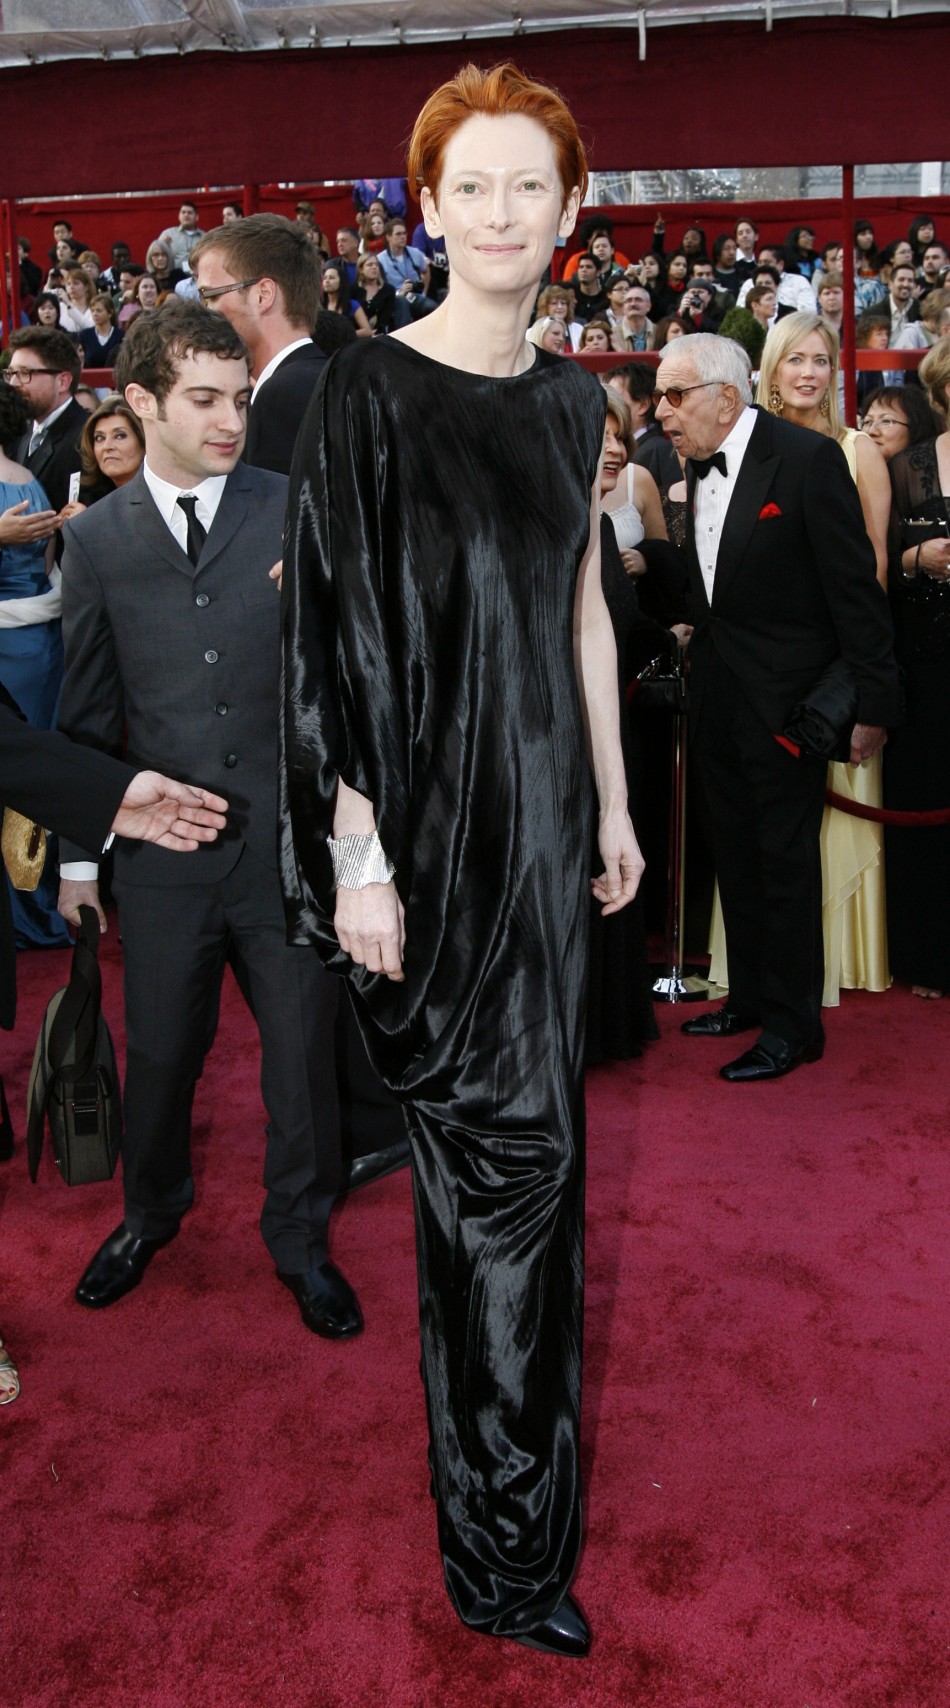 Best supporting actress Oscar nominee Tilda Swinton arrives at the 80th annual Academy Awards in Hollywood